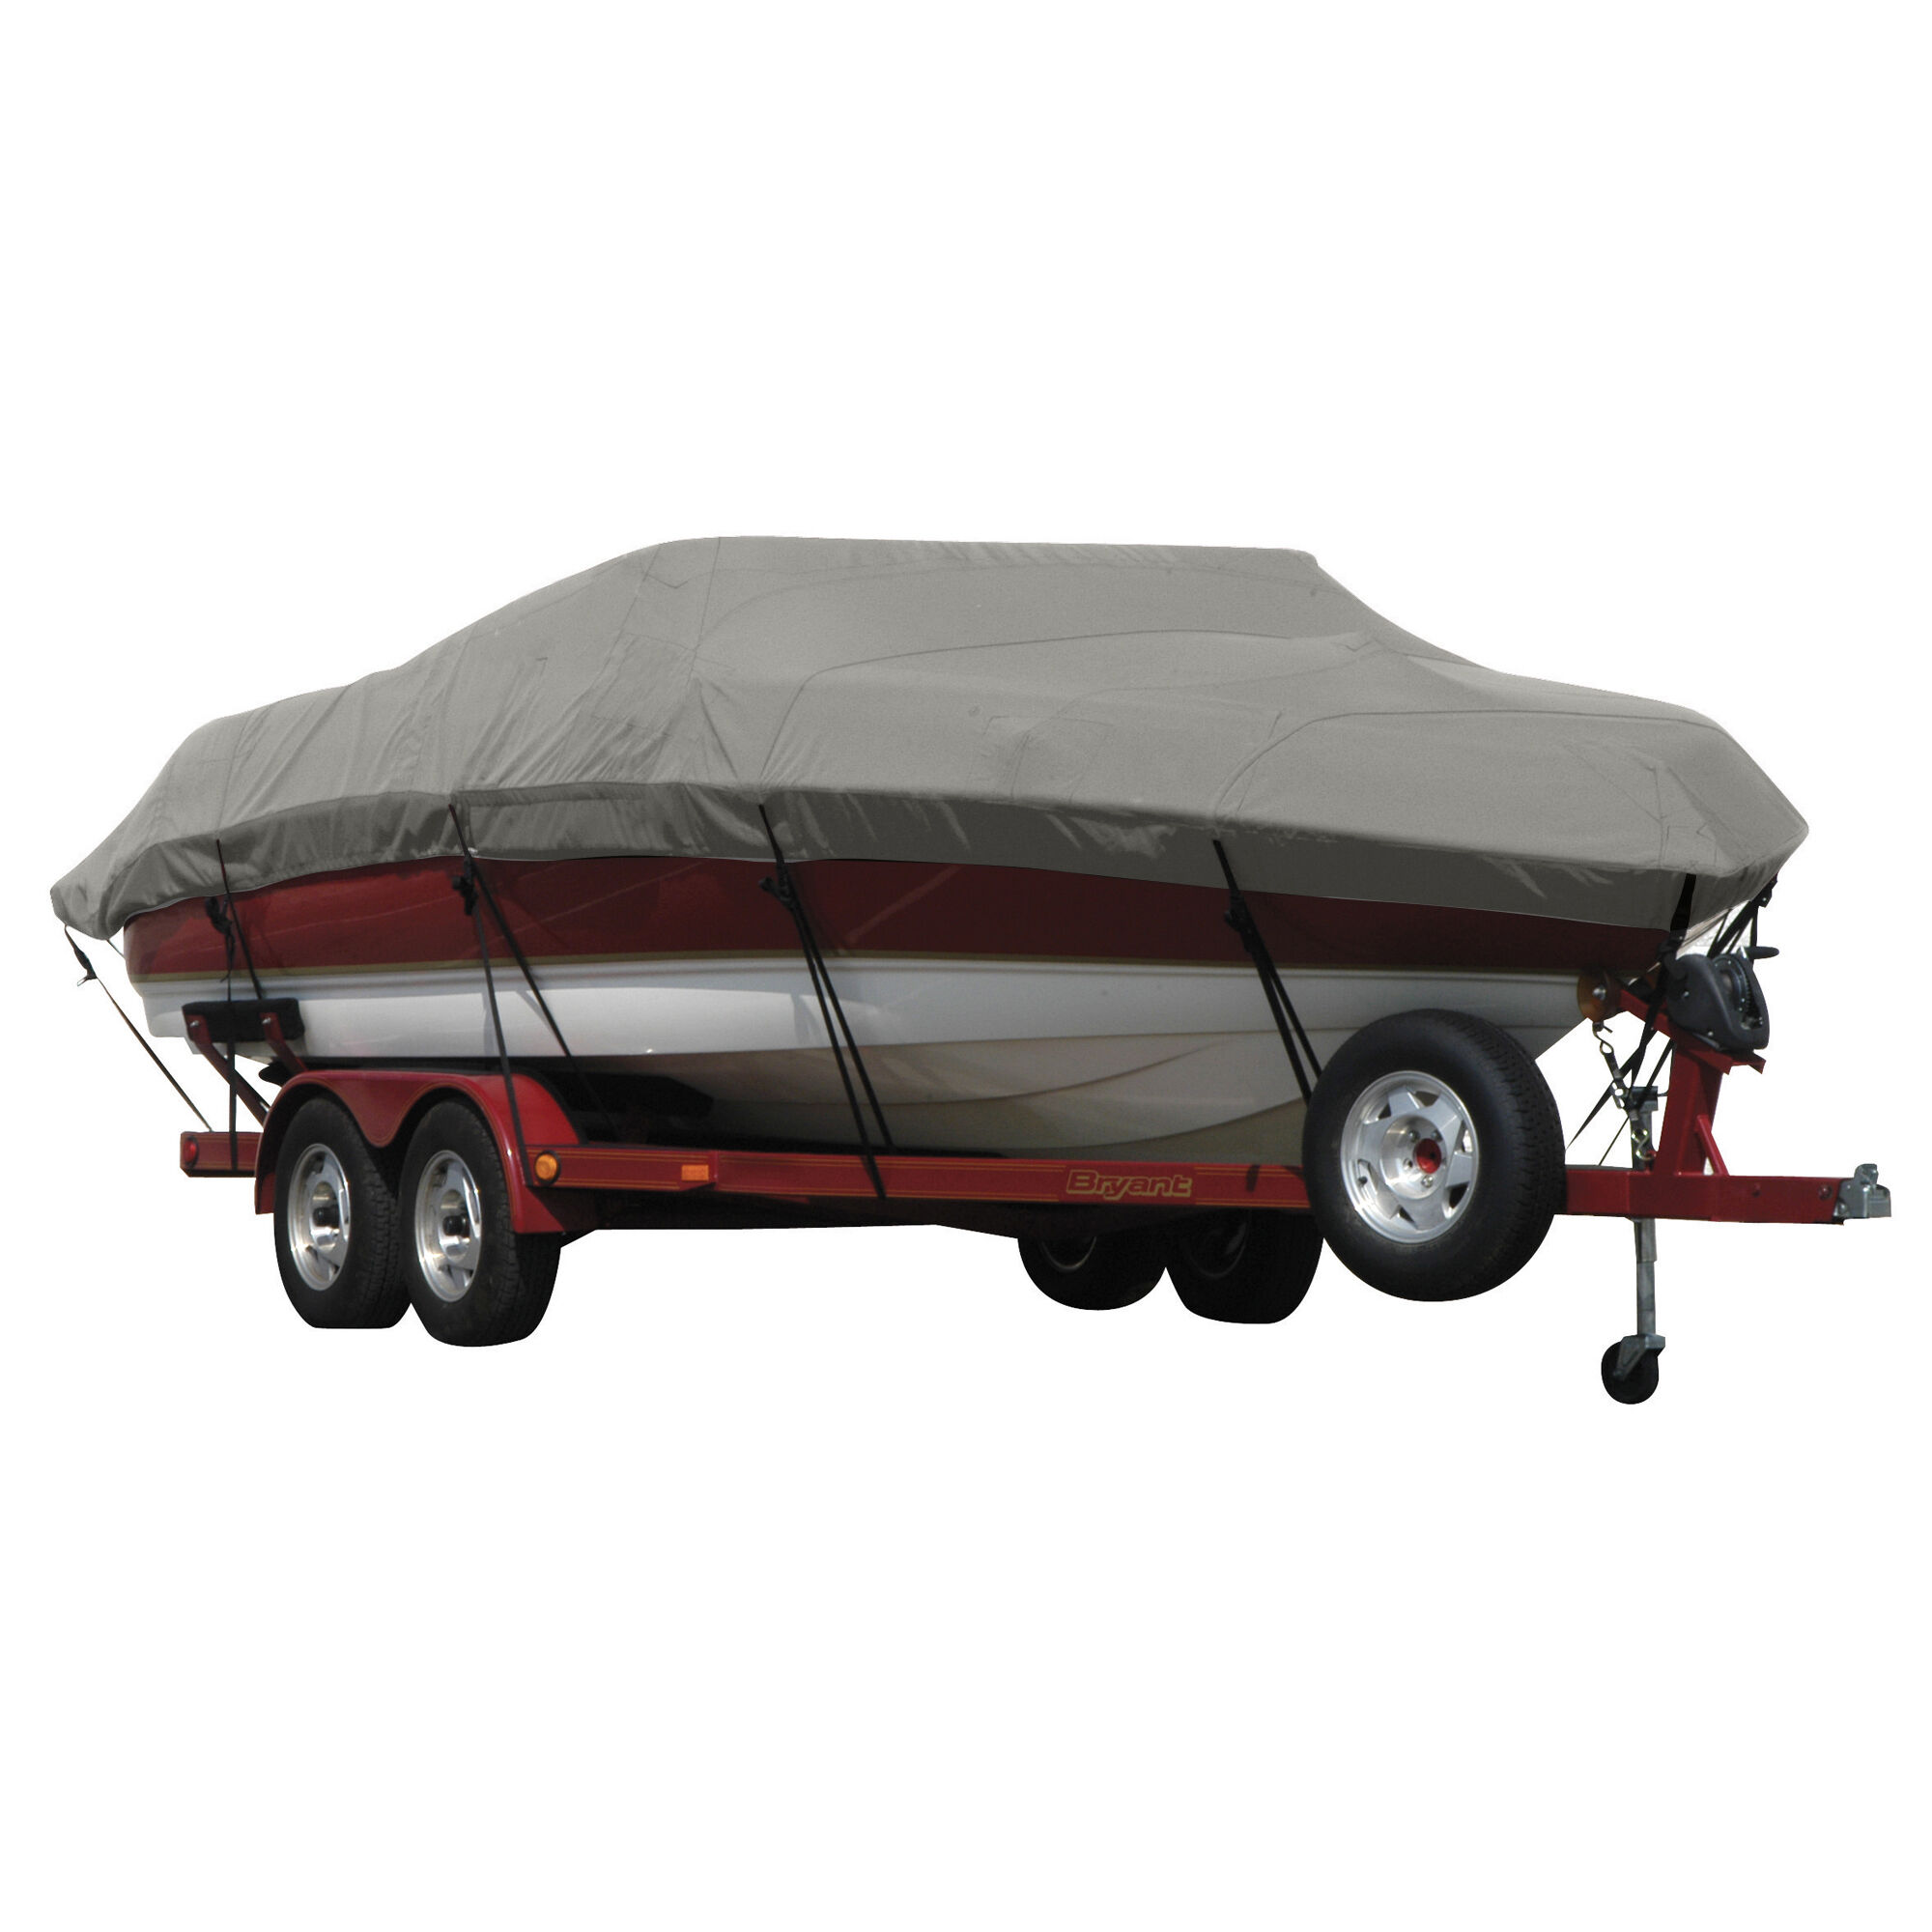 Covermate Exact Fit Sunbrella Boat Cover for Campion Chase 580 Zri/Zricd Chase 580 Zri/Zricd I/O. Charcoal Grey Heather Acrylic